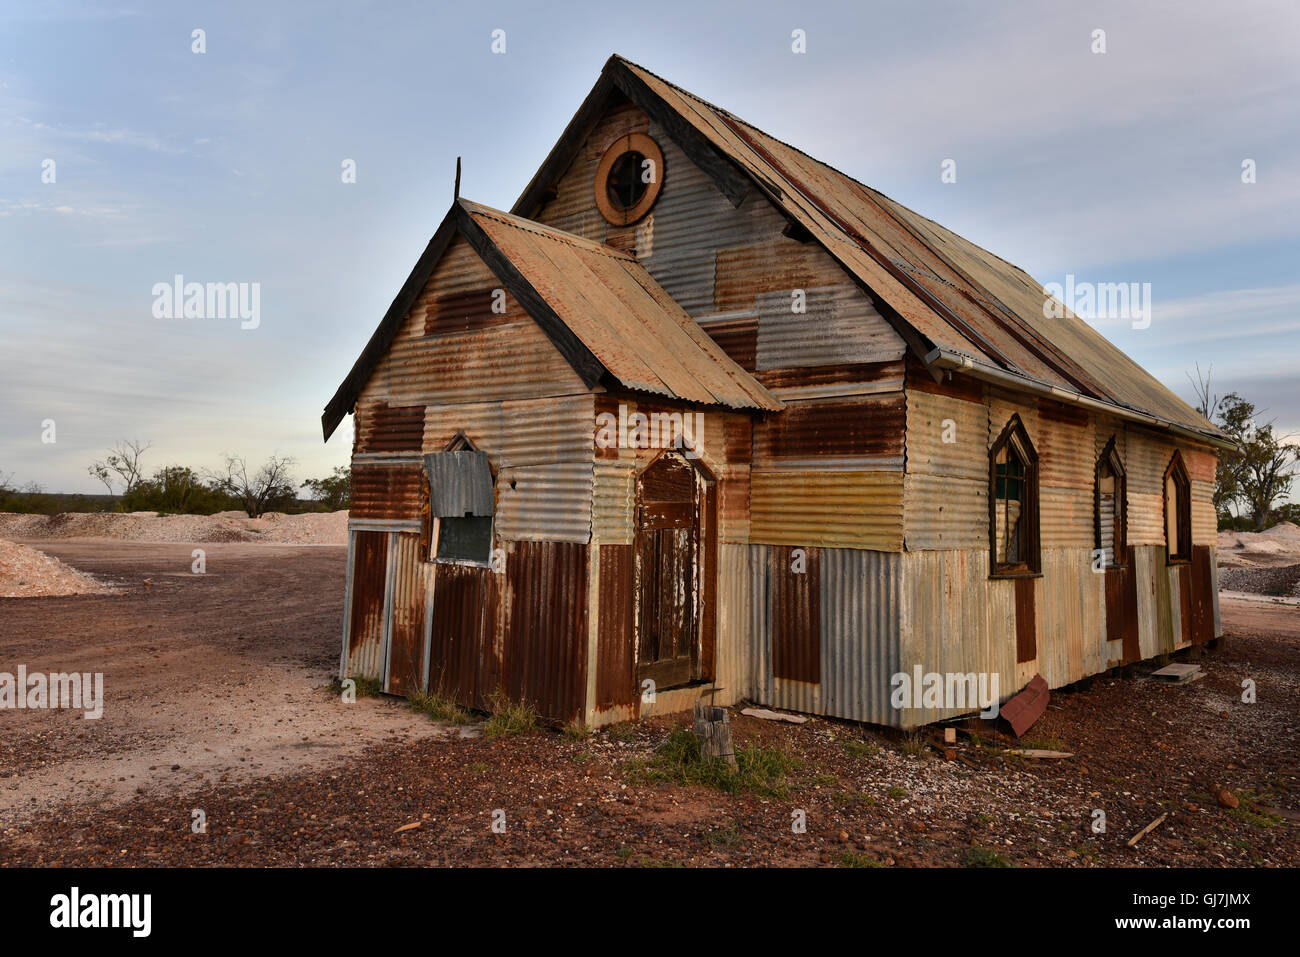 Goddess of 1967" church, the movie set for a 2000 film starring Rose Byrne  in outback opal mining town lightning ridge Stock Photo - Alamy